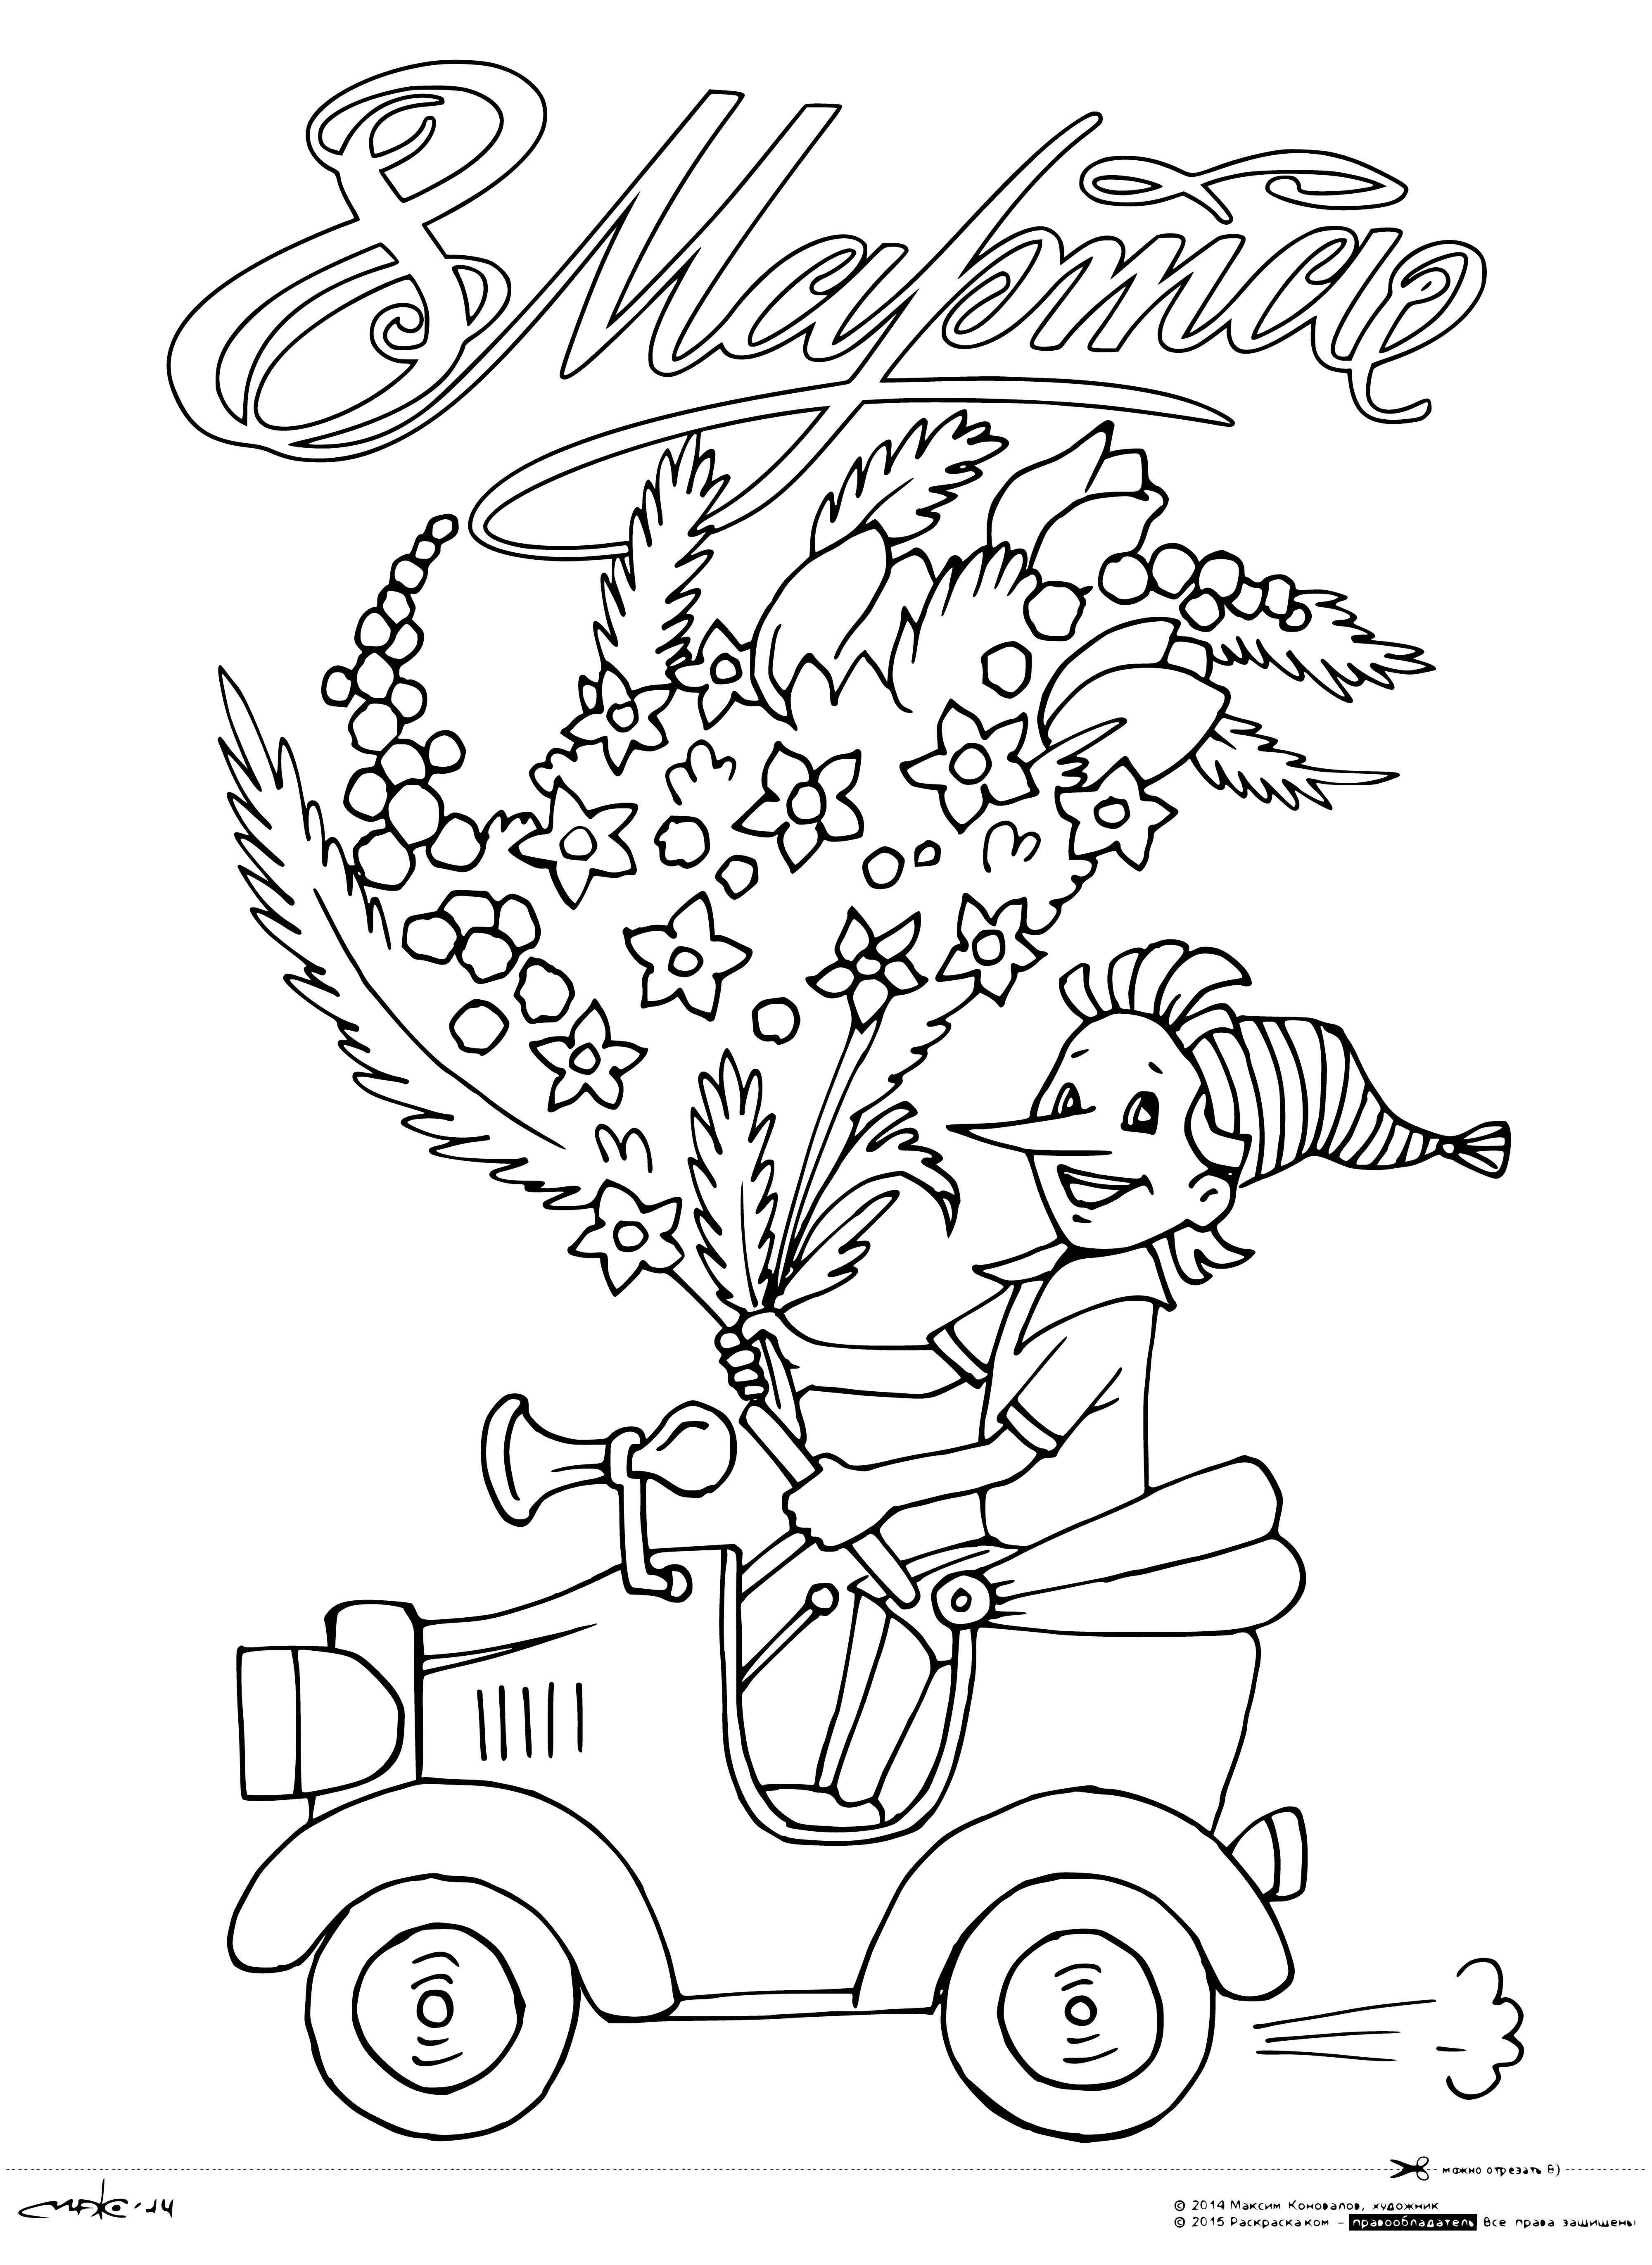 coloring page: Buratino celebrates International Women’s Day with a big smile and a "Happy Women's Day" sign.